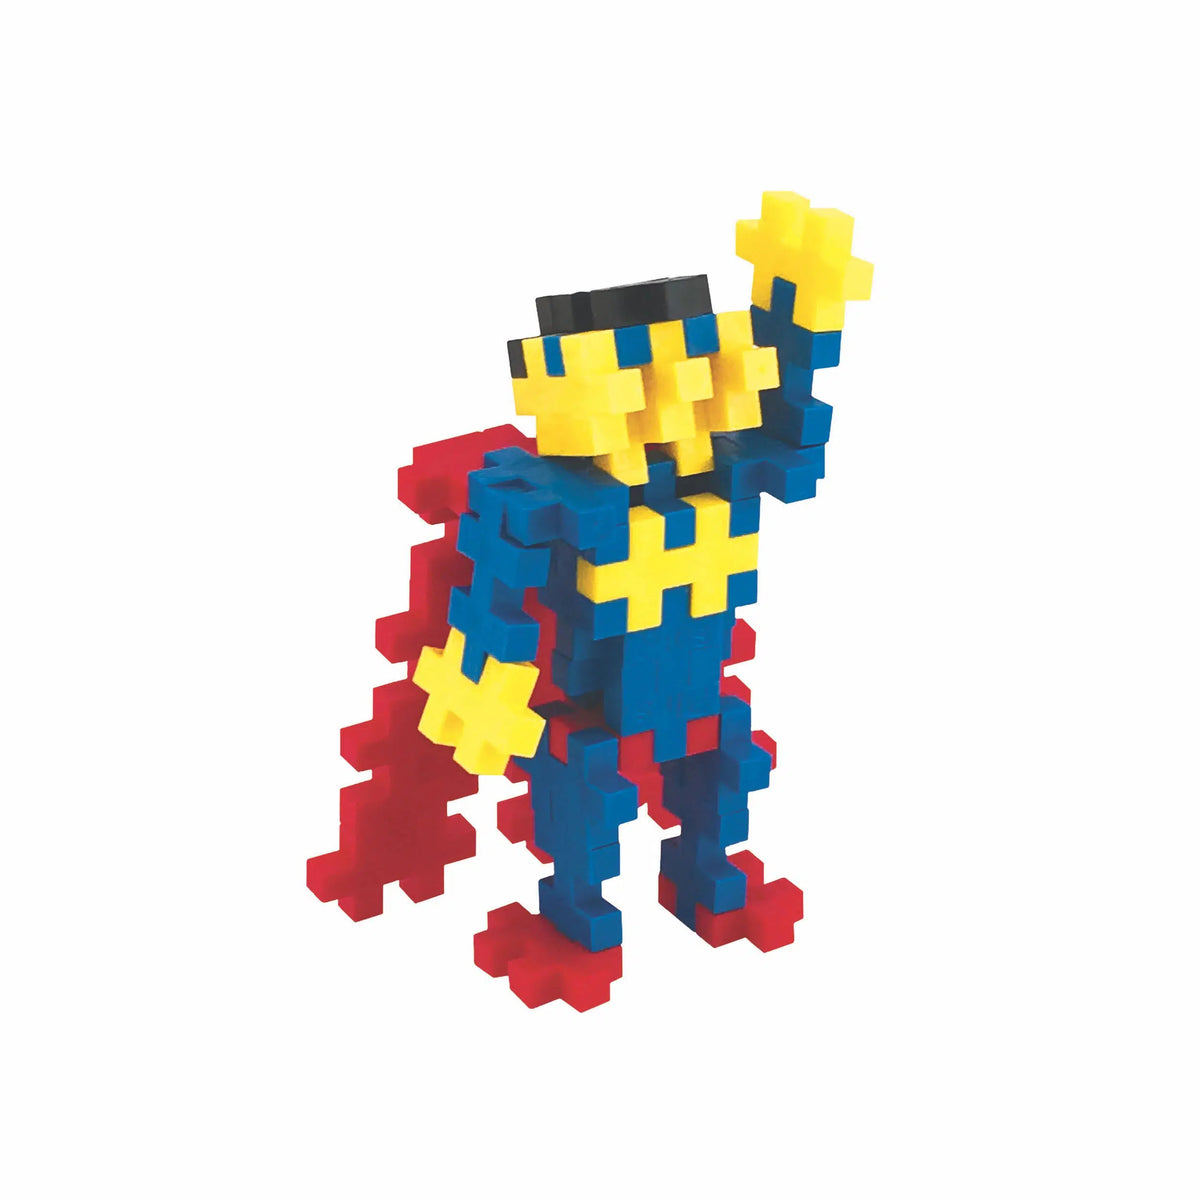 Superhero with red cape and blue suit